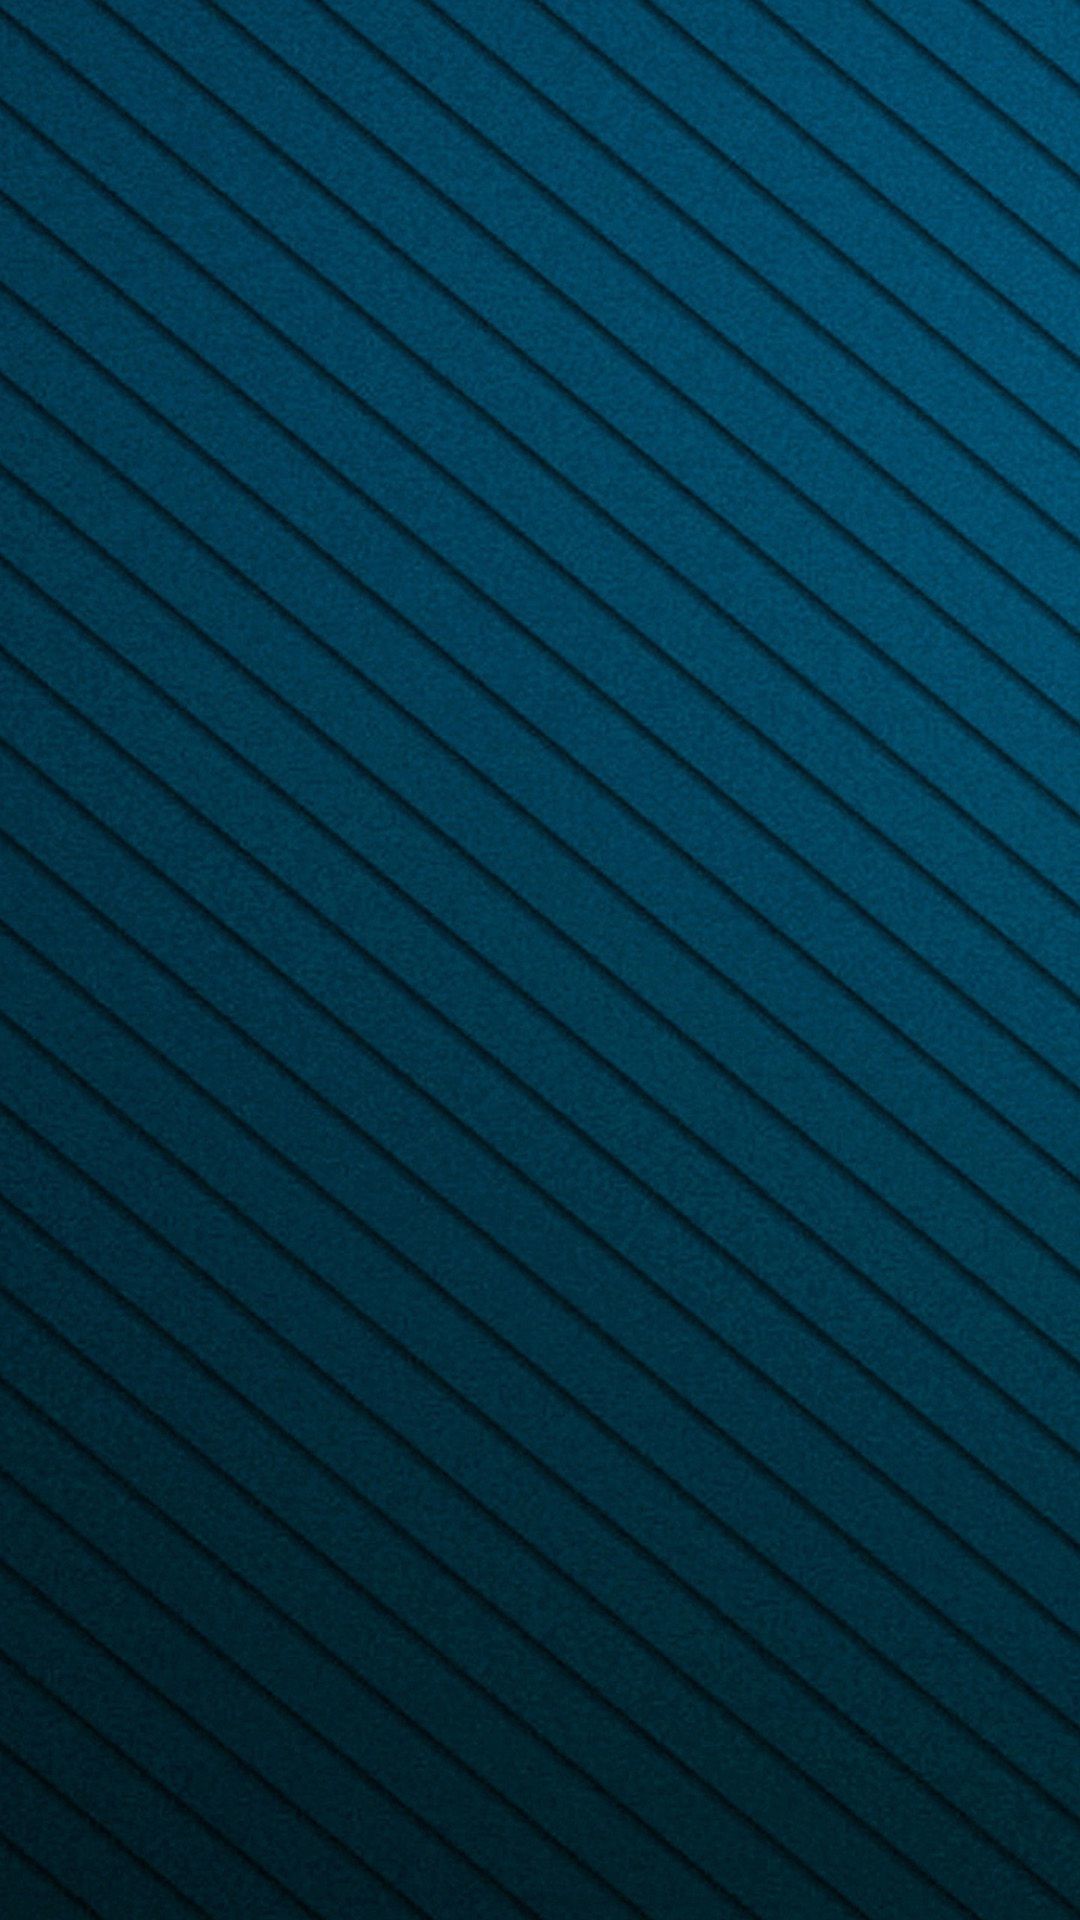 1080x1920 Samsung Galaxy S5 Wallpapers - Texture (25) - Shy Android